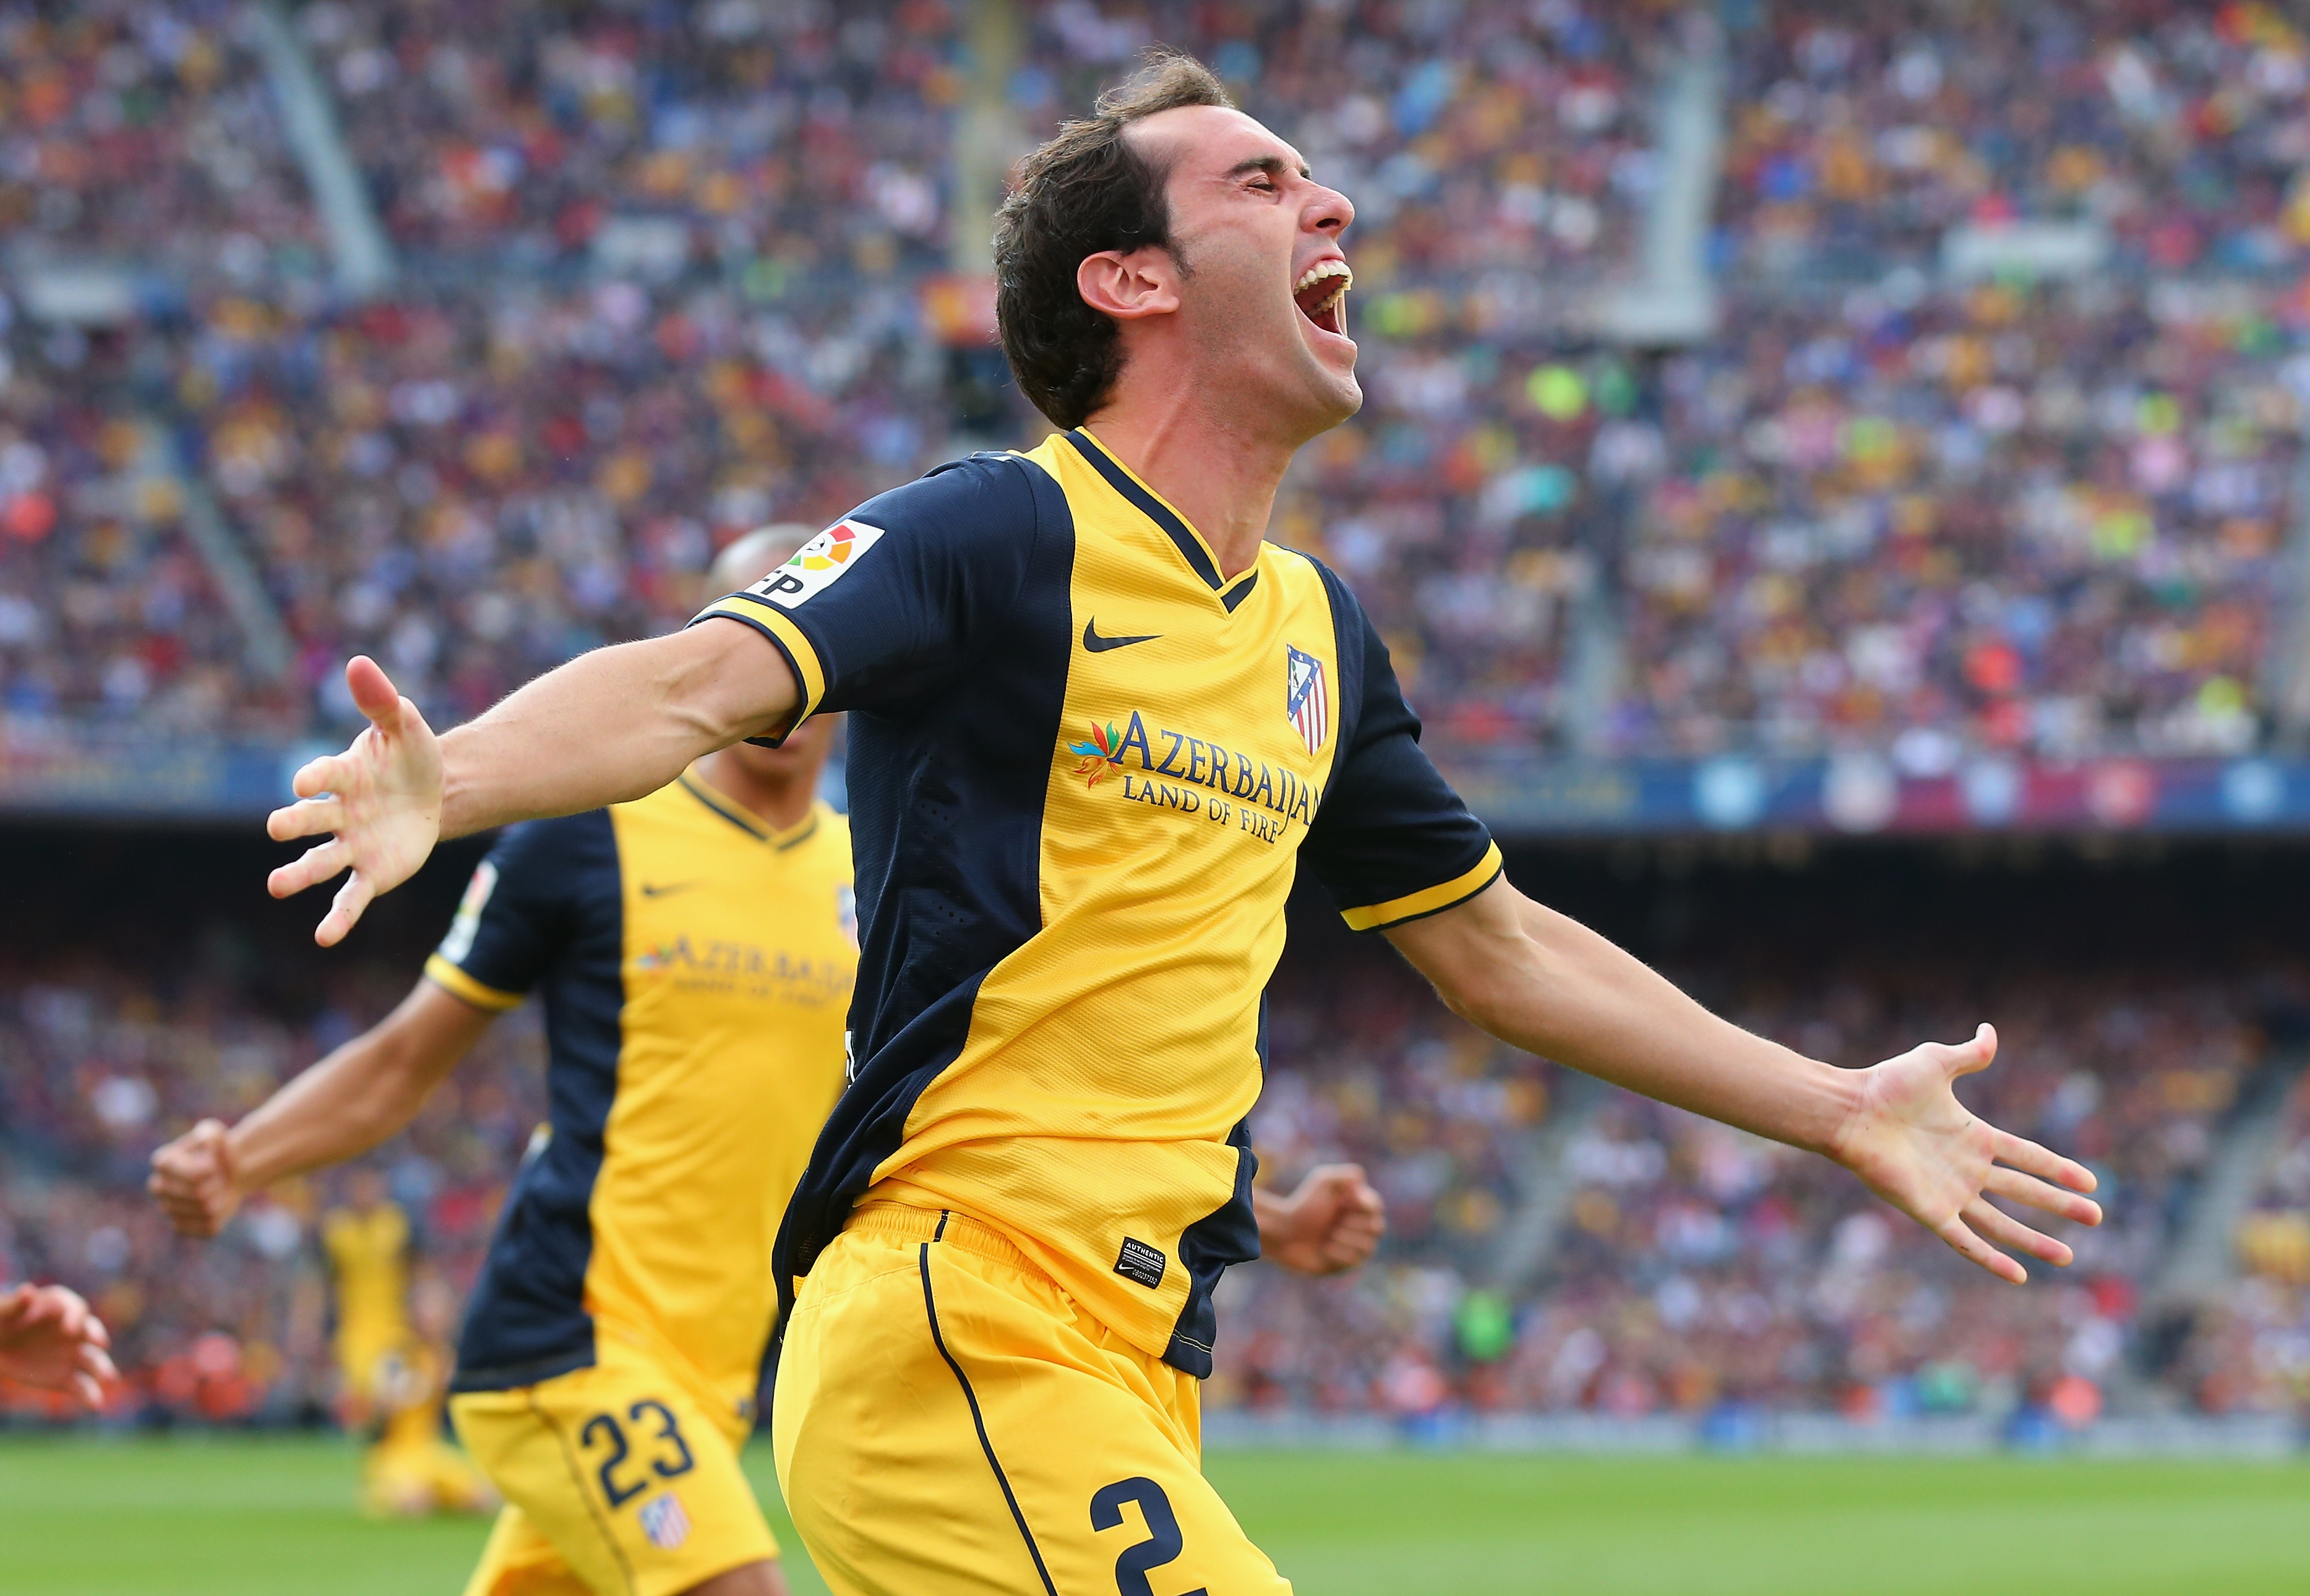 Diego Godin celebrates after scoring for Atletico Madrid against Barcelona in the teams' La Liga decider at Camp Nou in May 2014.